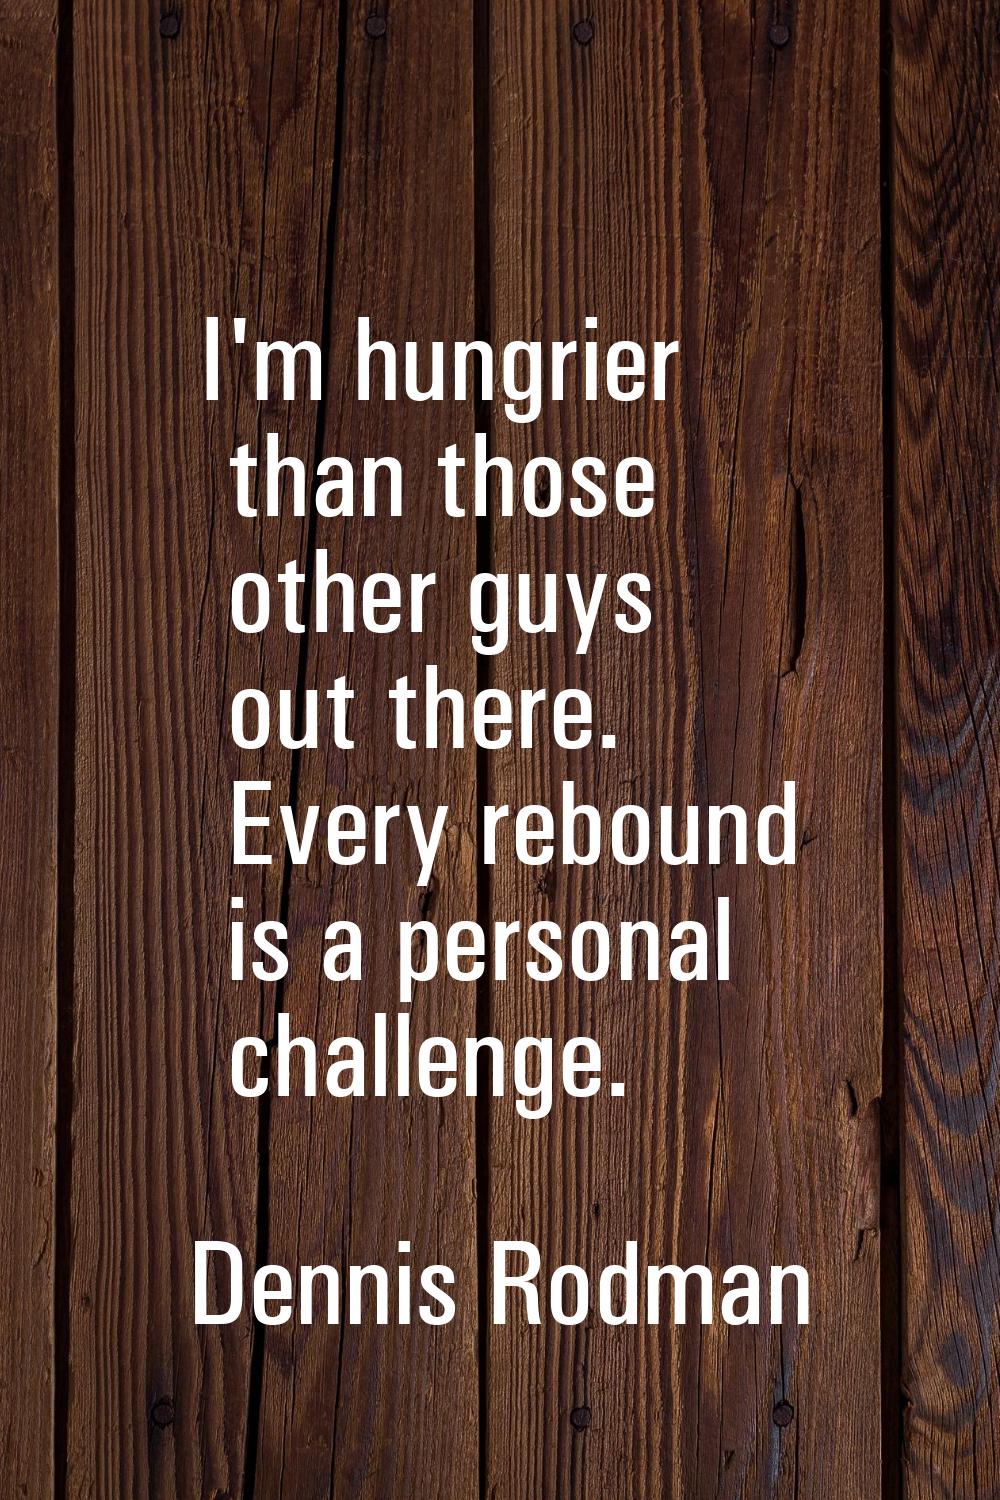 I'm hungrier than those other guys out there. Every rebound is a personal challenge.